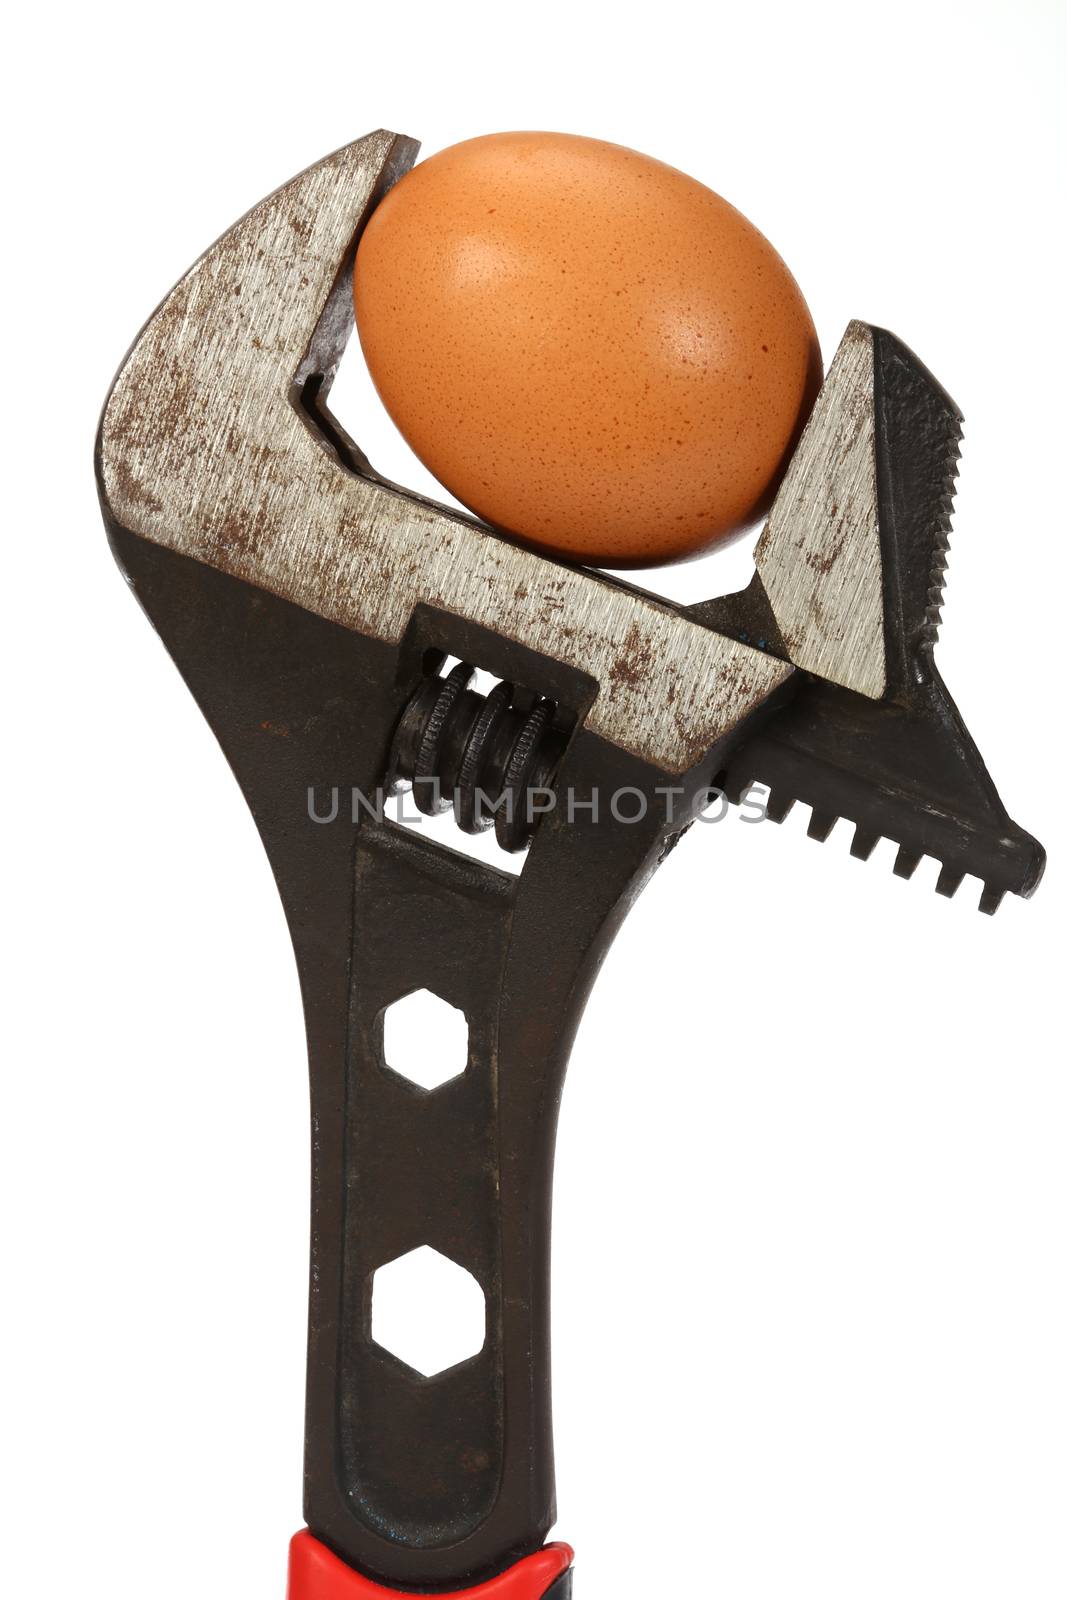 Wrench and a egg close up over white